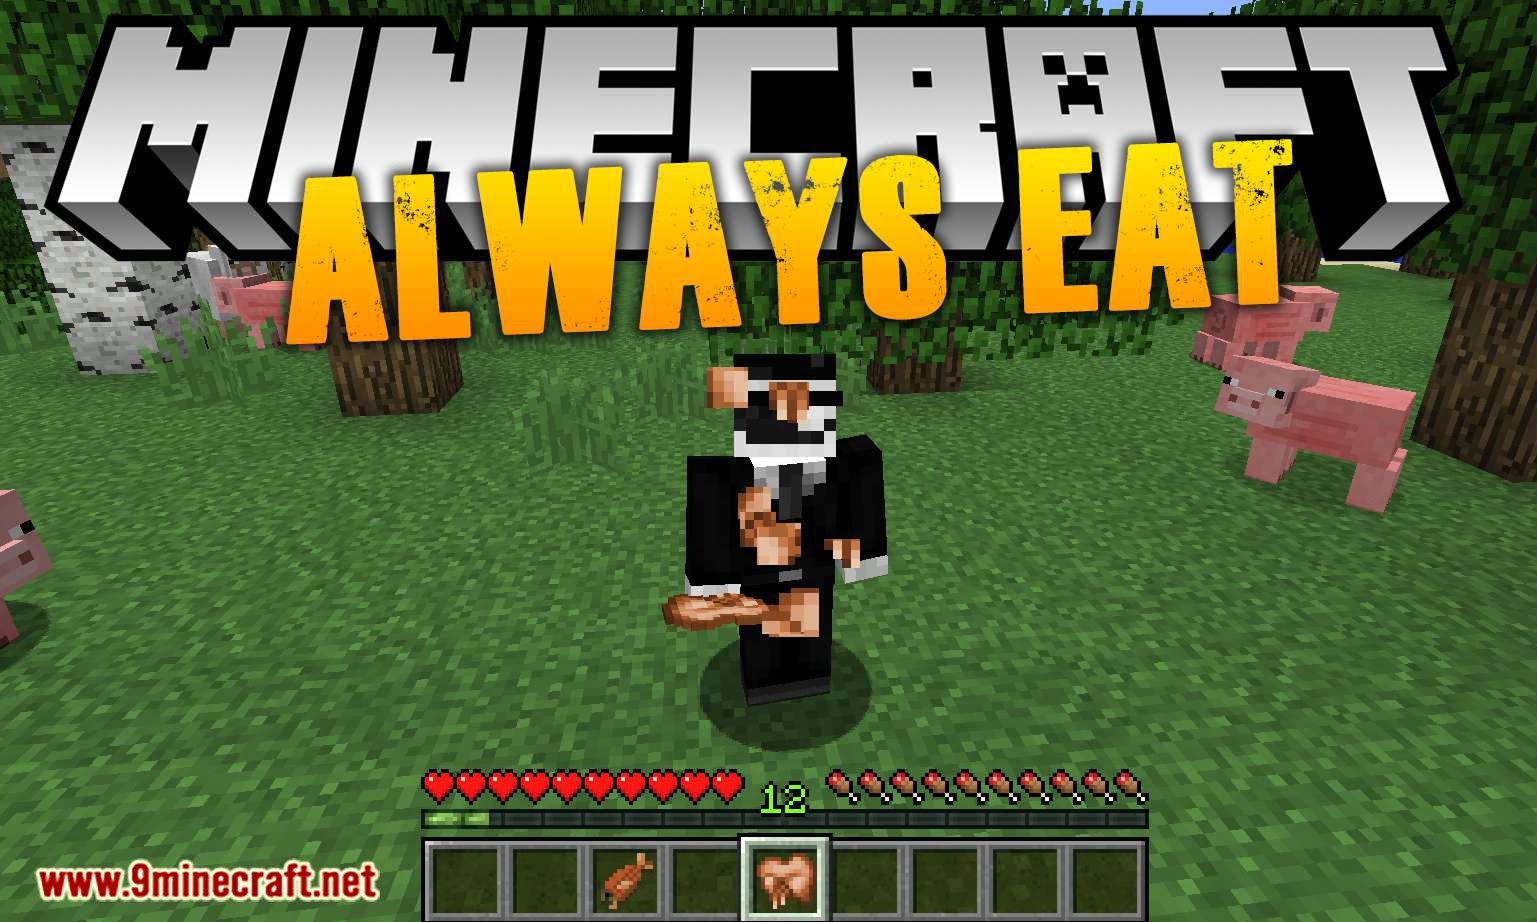 What Do Cats Eat In Minecraft